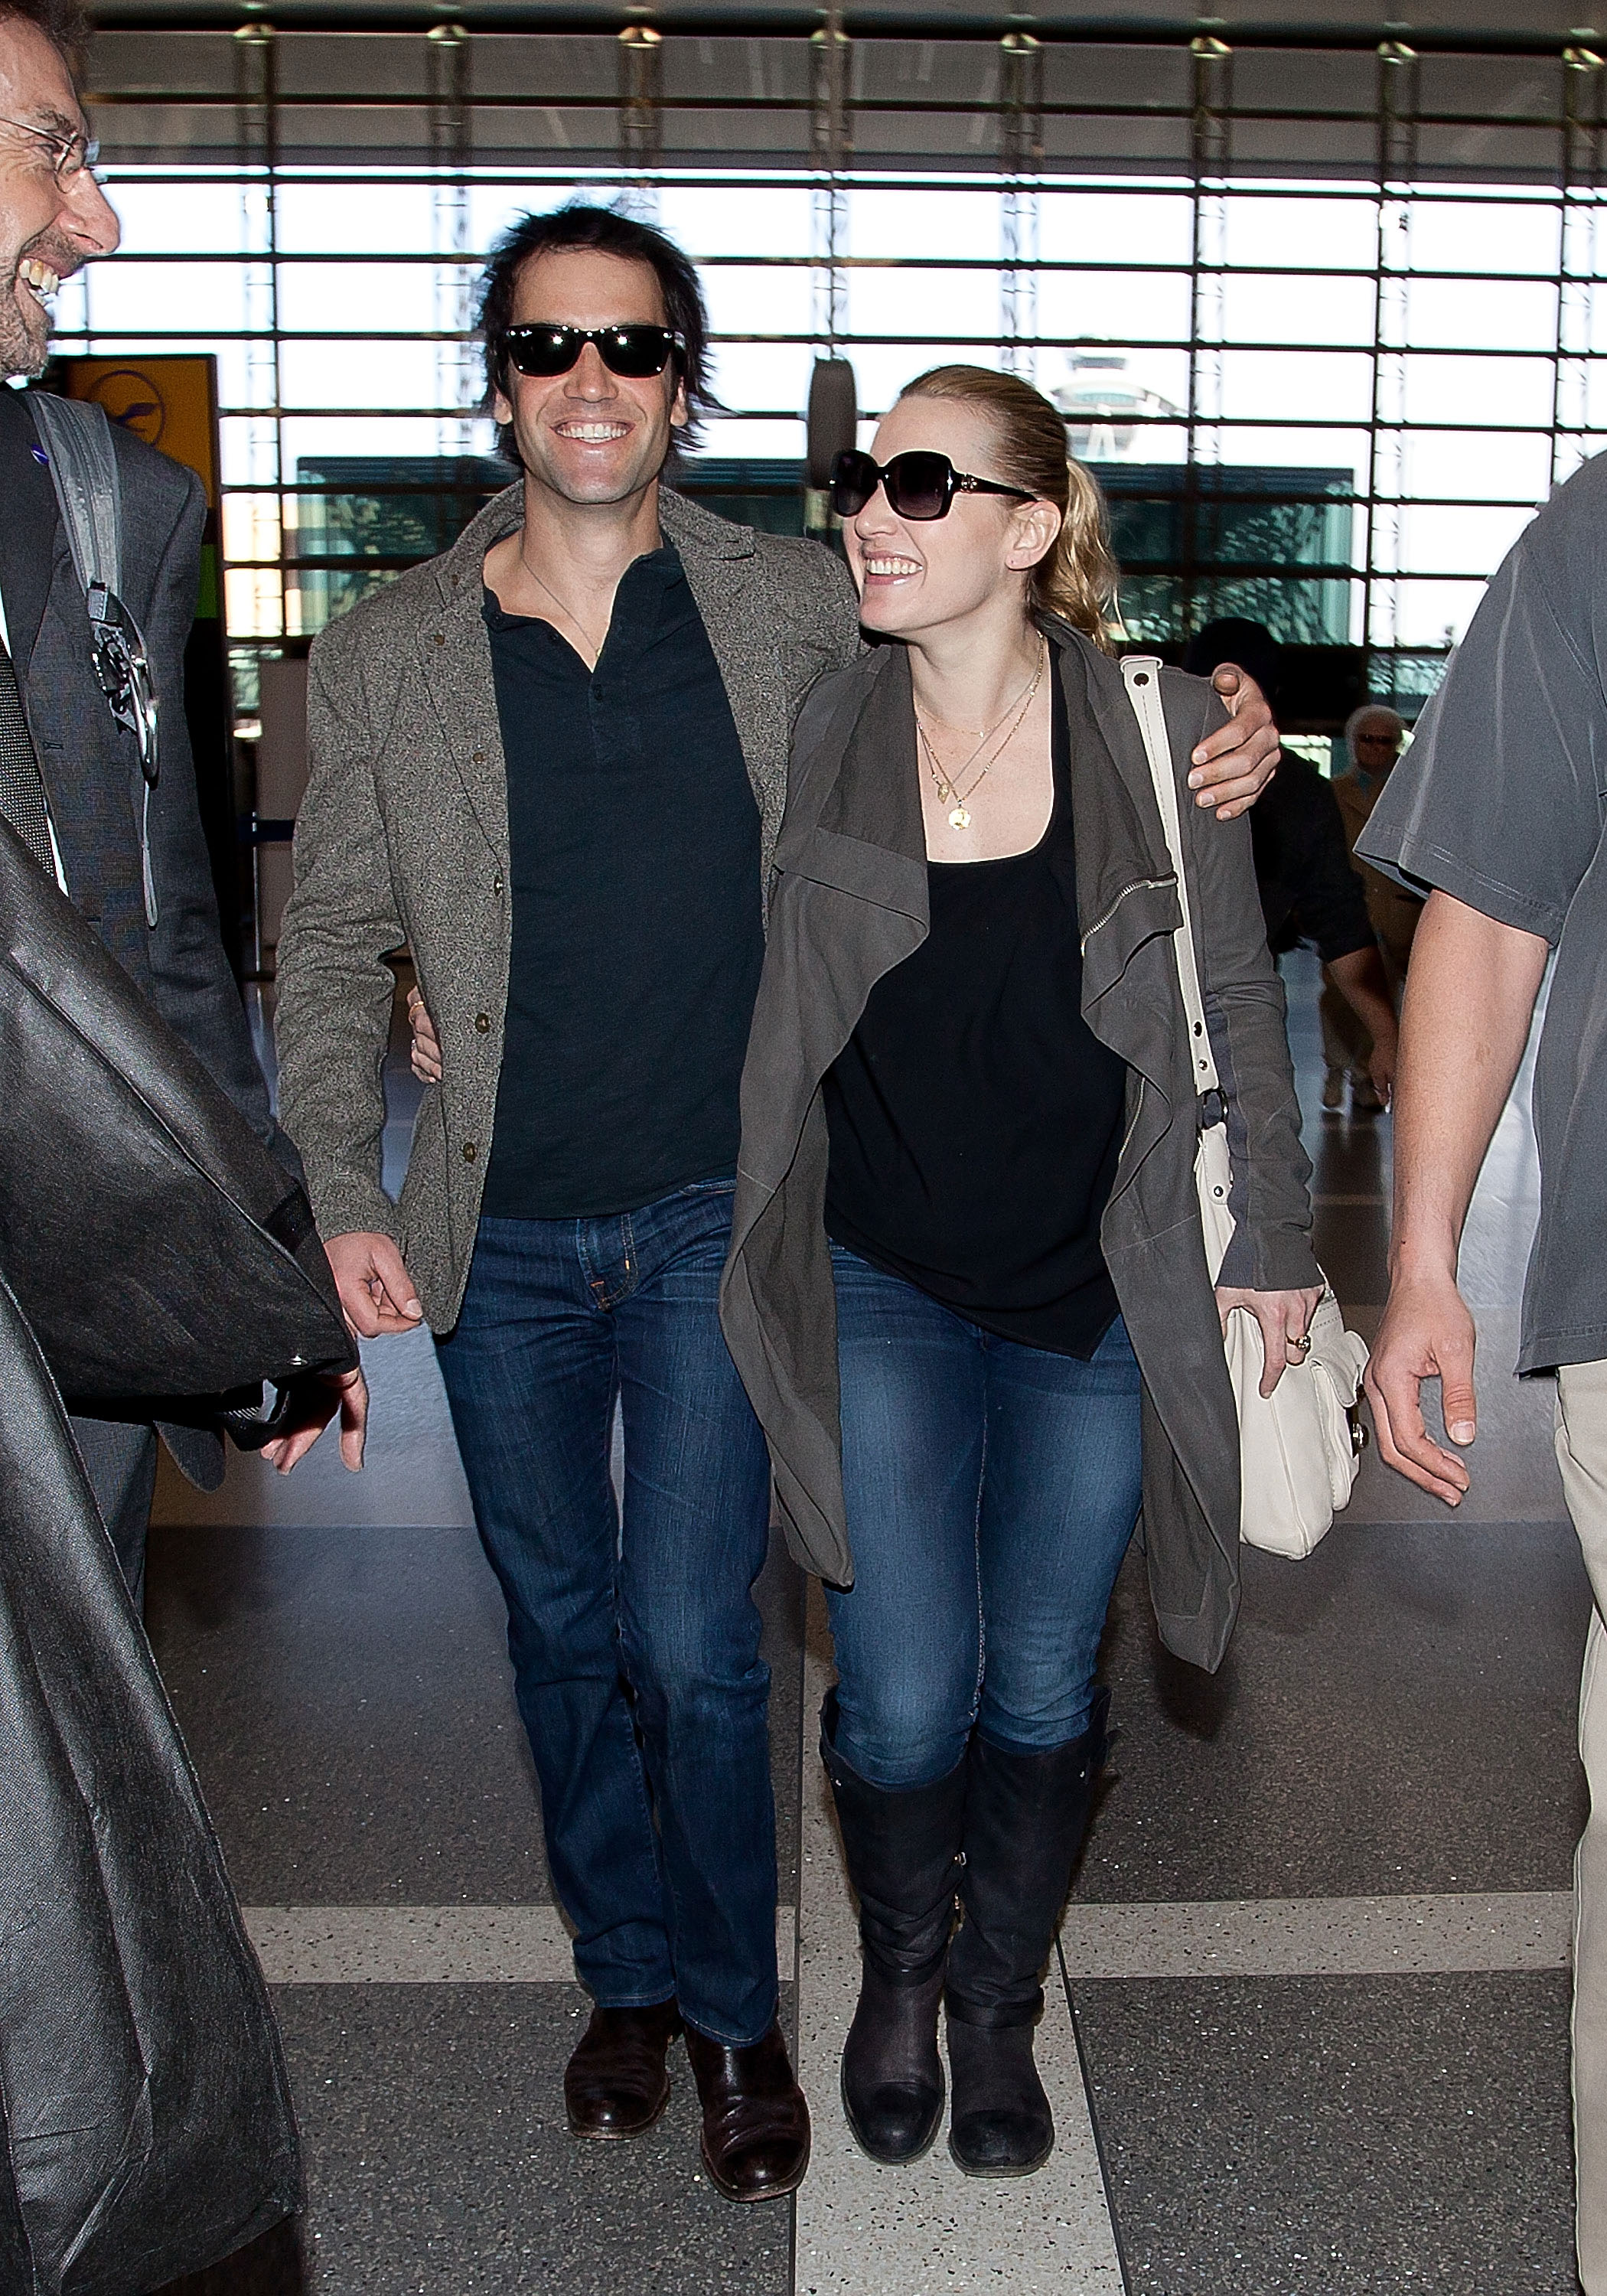  Kate Winslet and Edward Smith are seen at Los Angeles International Airport on January 16, 2012 in Los Angeles, California | Source: Getty Images